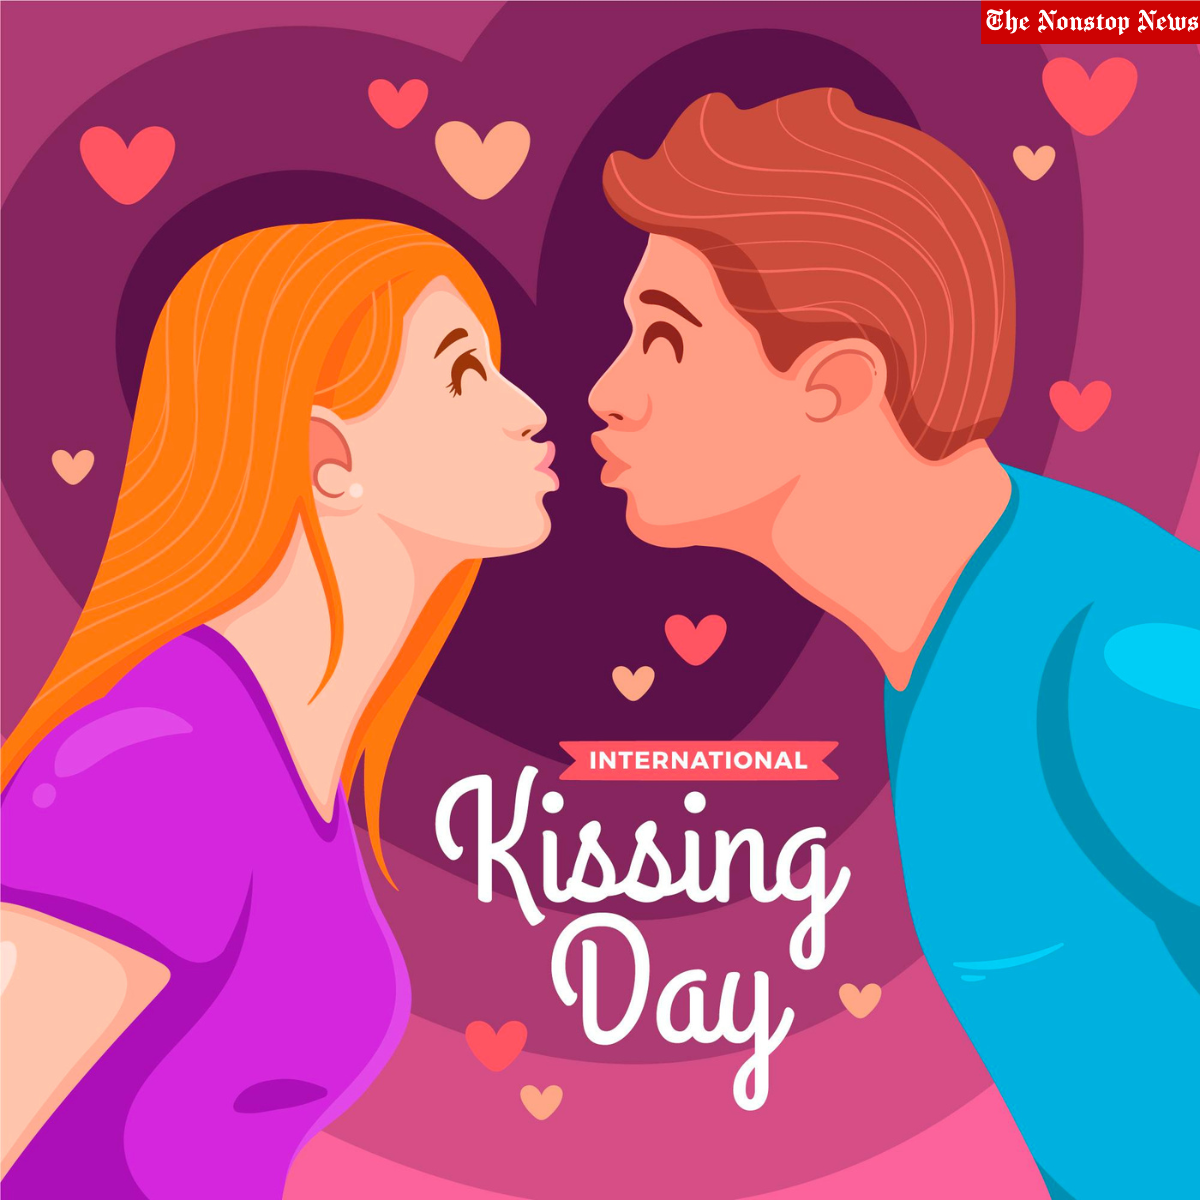 International Kissing Day 2022: Best Instagram Captions, Facebook Greetings, Twitter Images, WhatsApp Quotes to Share